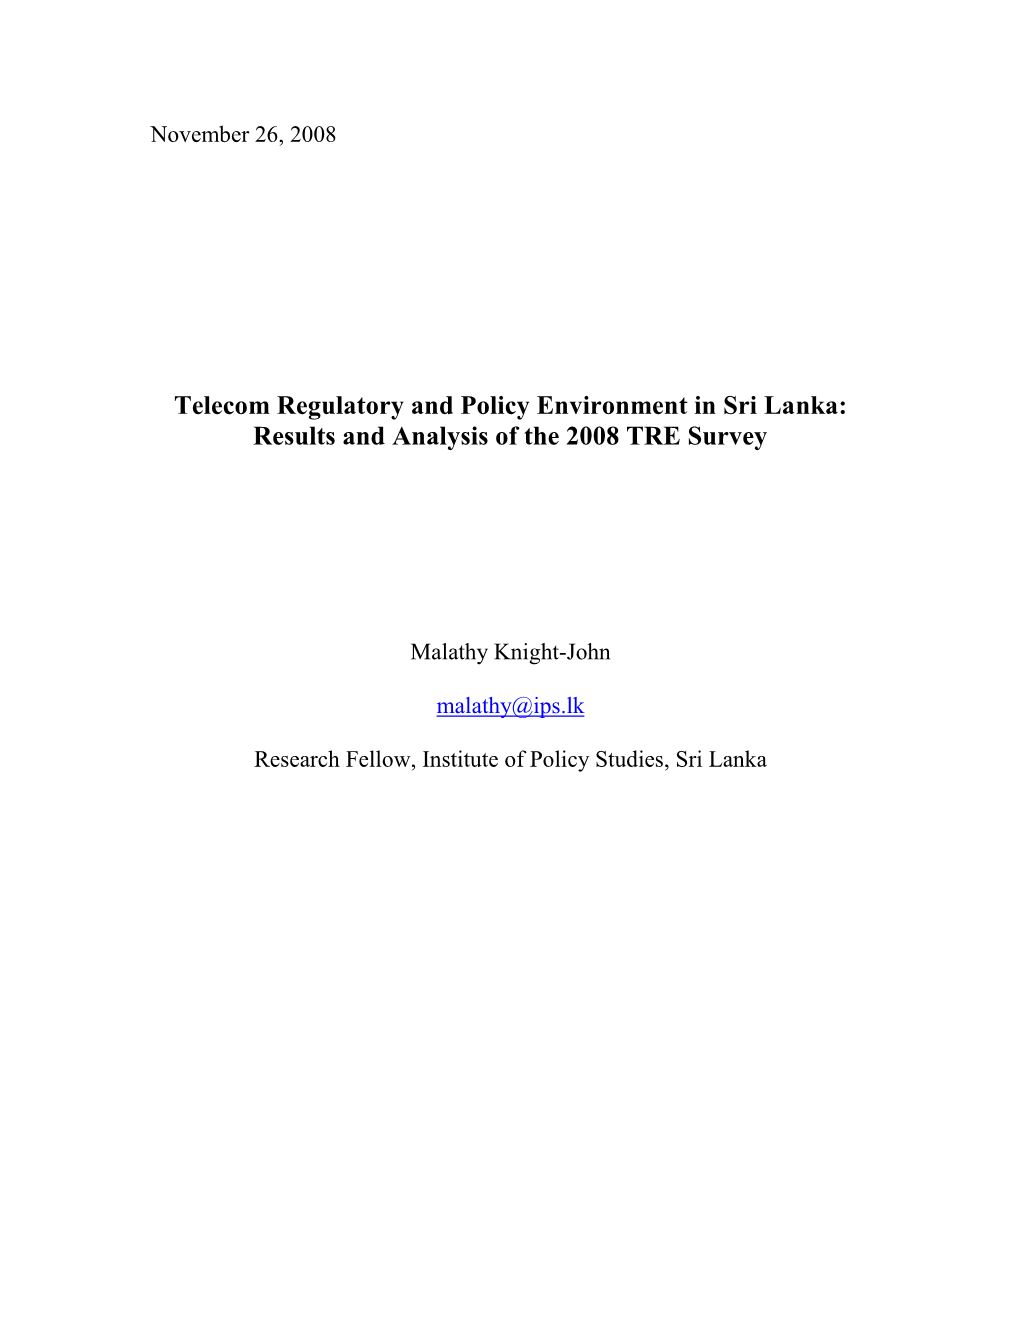 Telecom Regulatory and Policy Environment in Sri Lanka: Results and Analysis of the 2008 TRE Survey